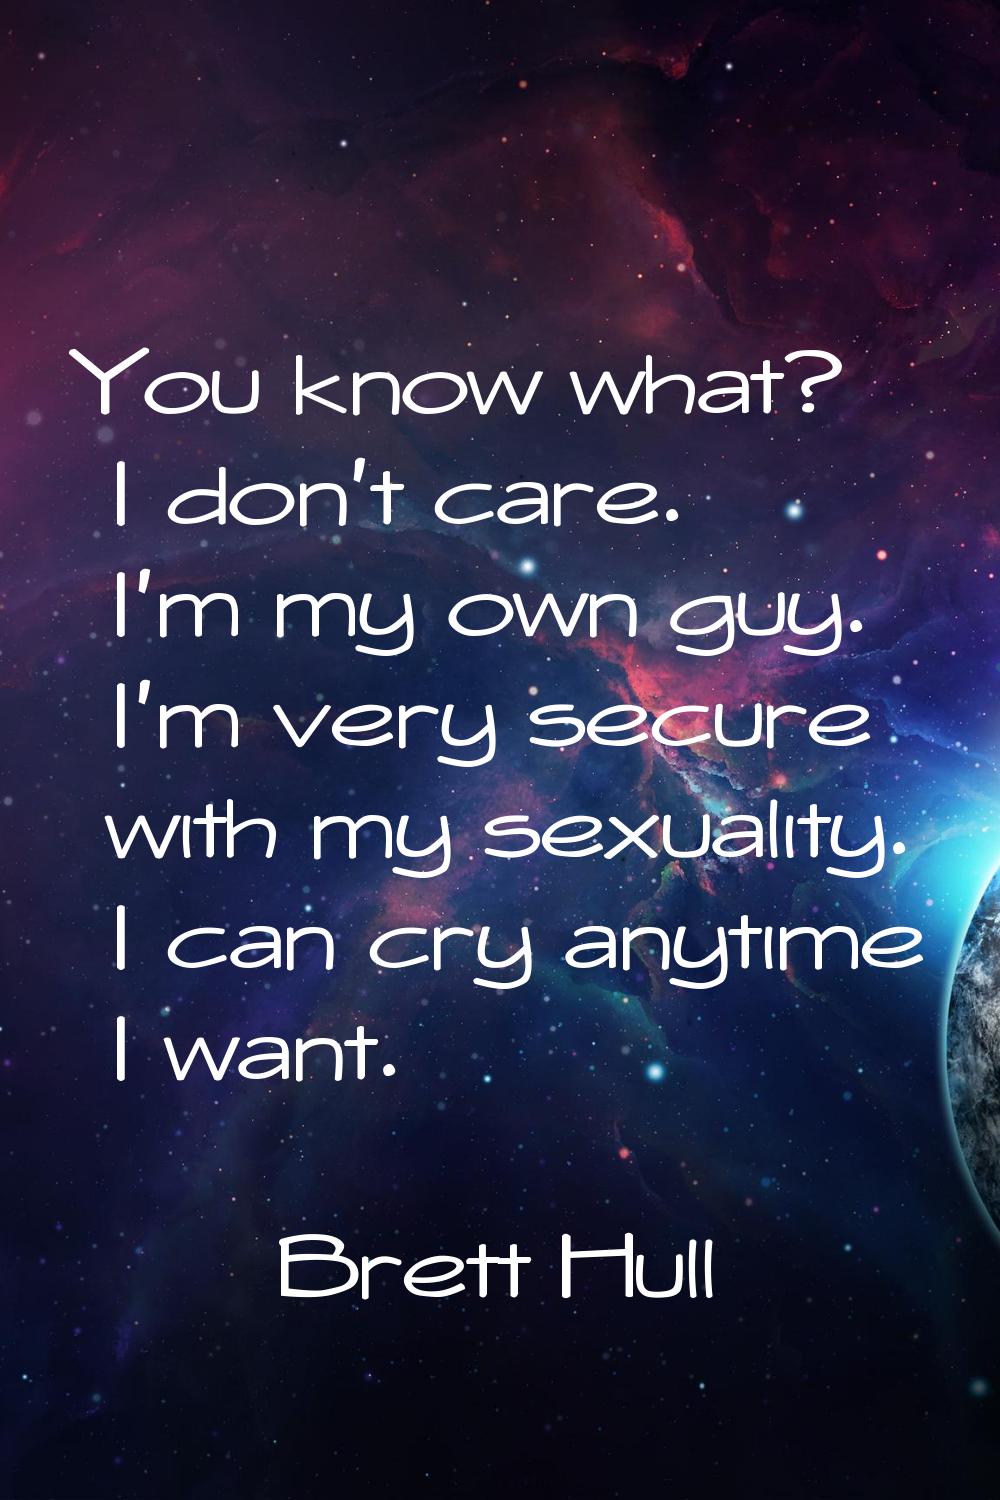 You know what? I don't care. I'm my own guy. I'm very secure with my sexuality. I can cry anytime I